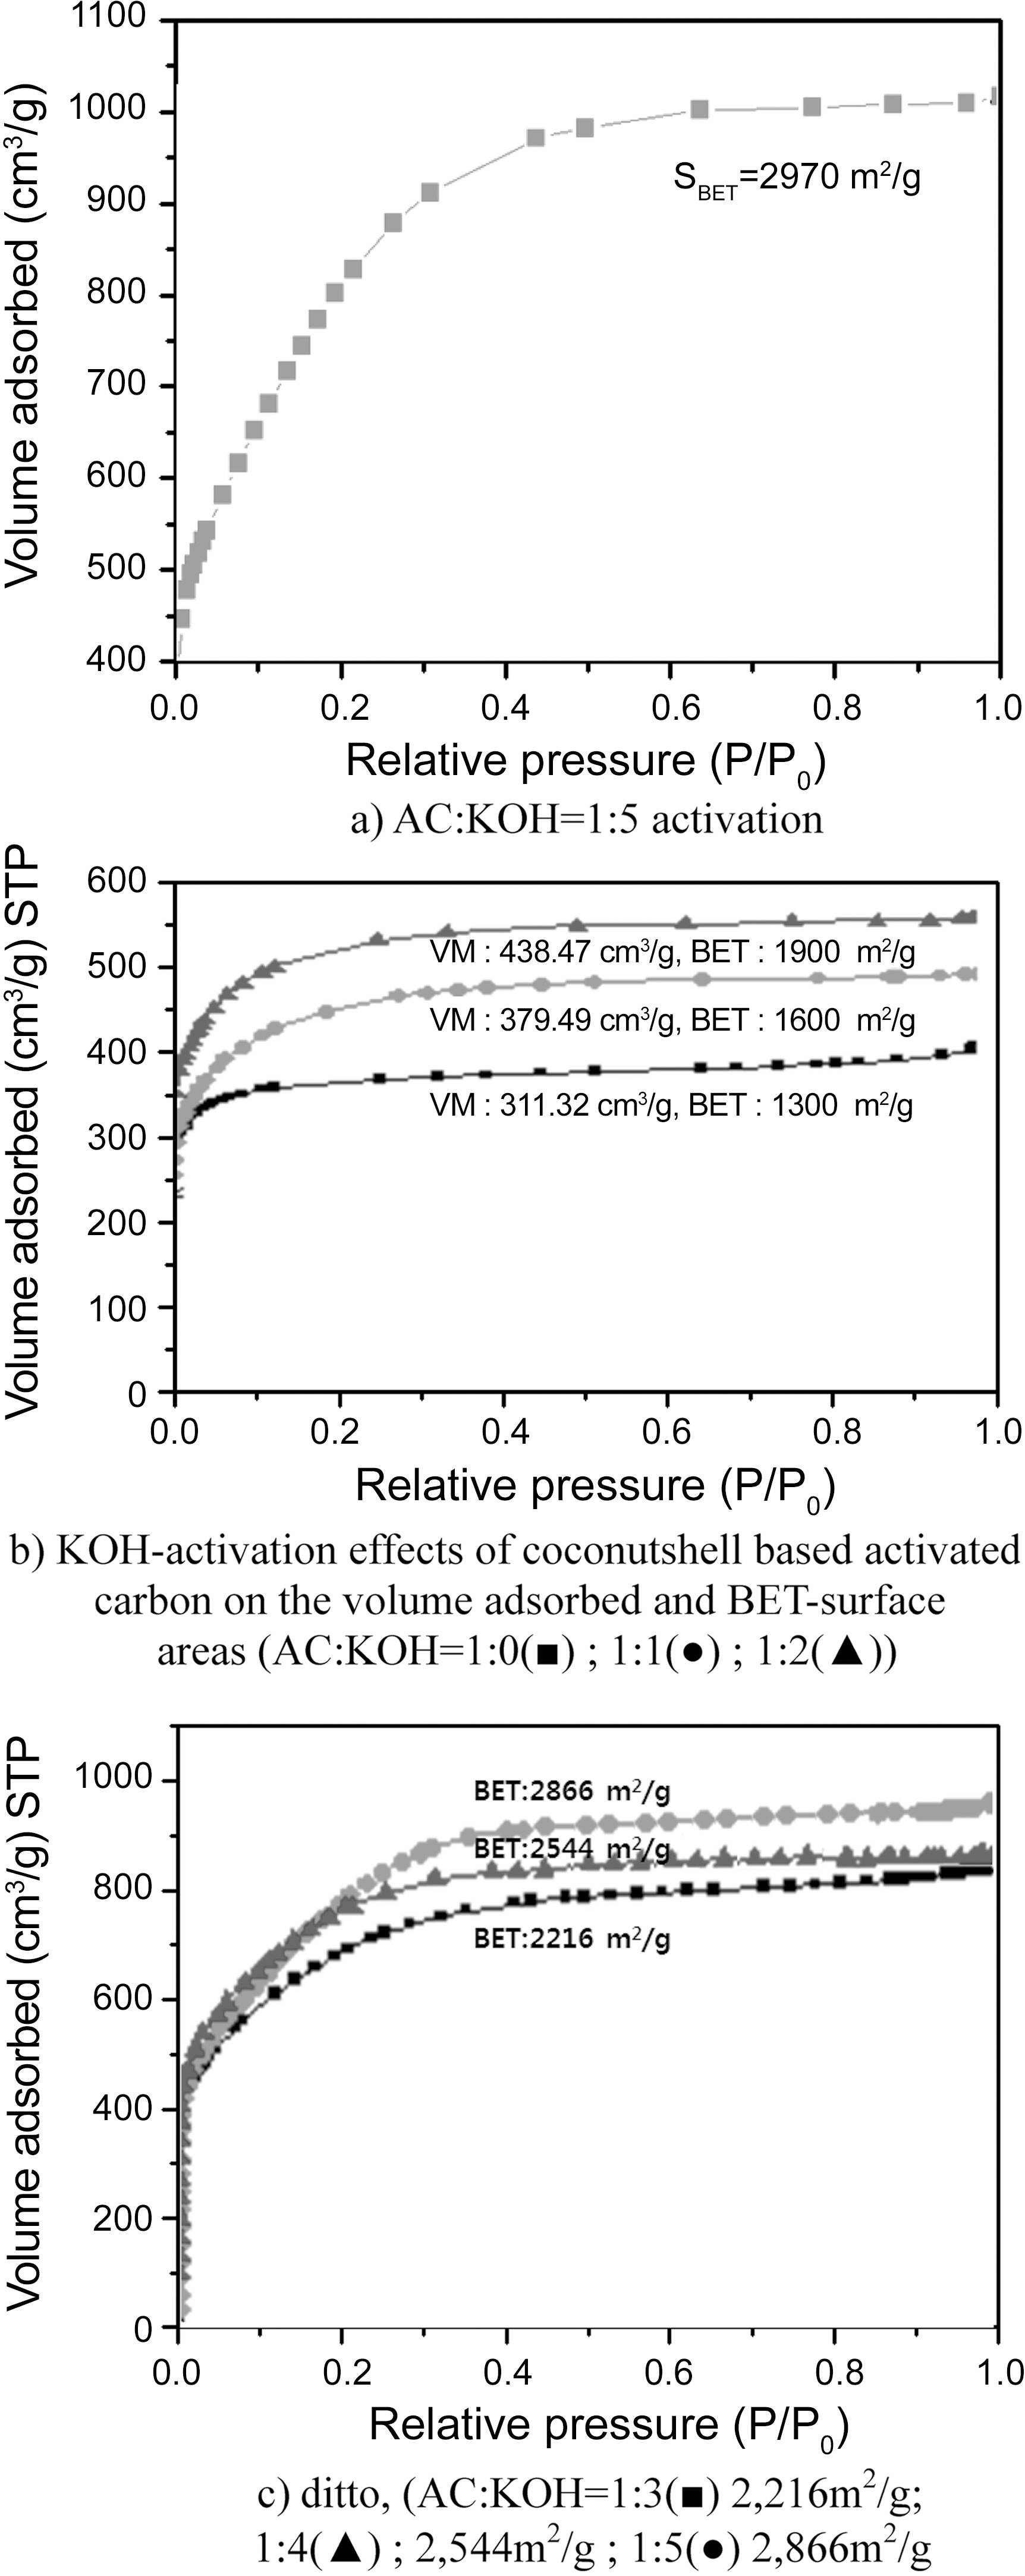 KOH-Activation effects of coconut shell activated carbon on the BET-Surface areas and volume adsorbed.